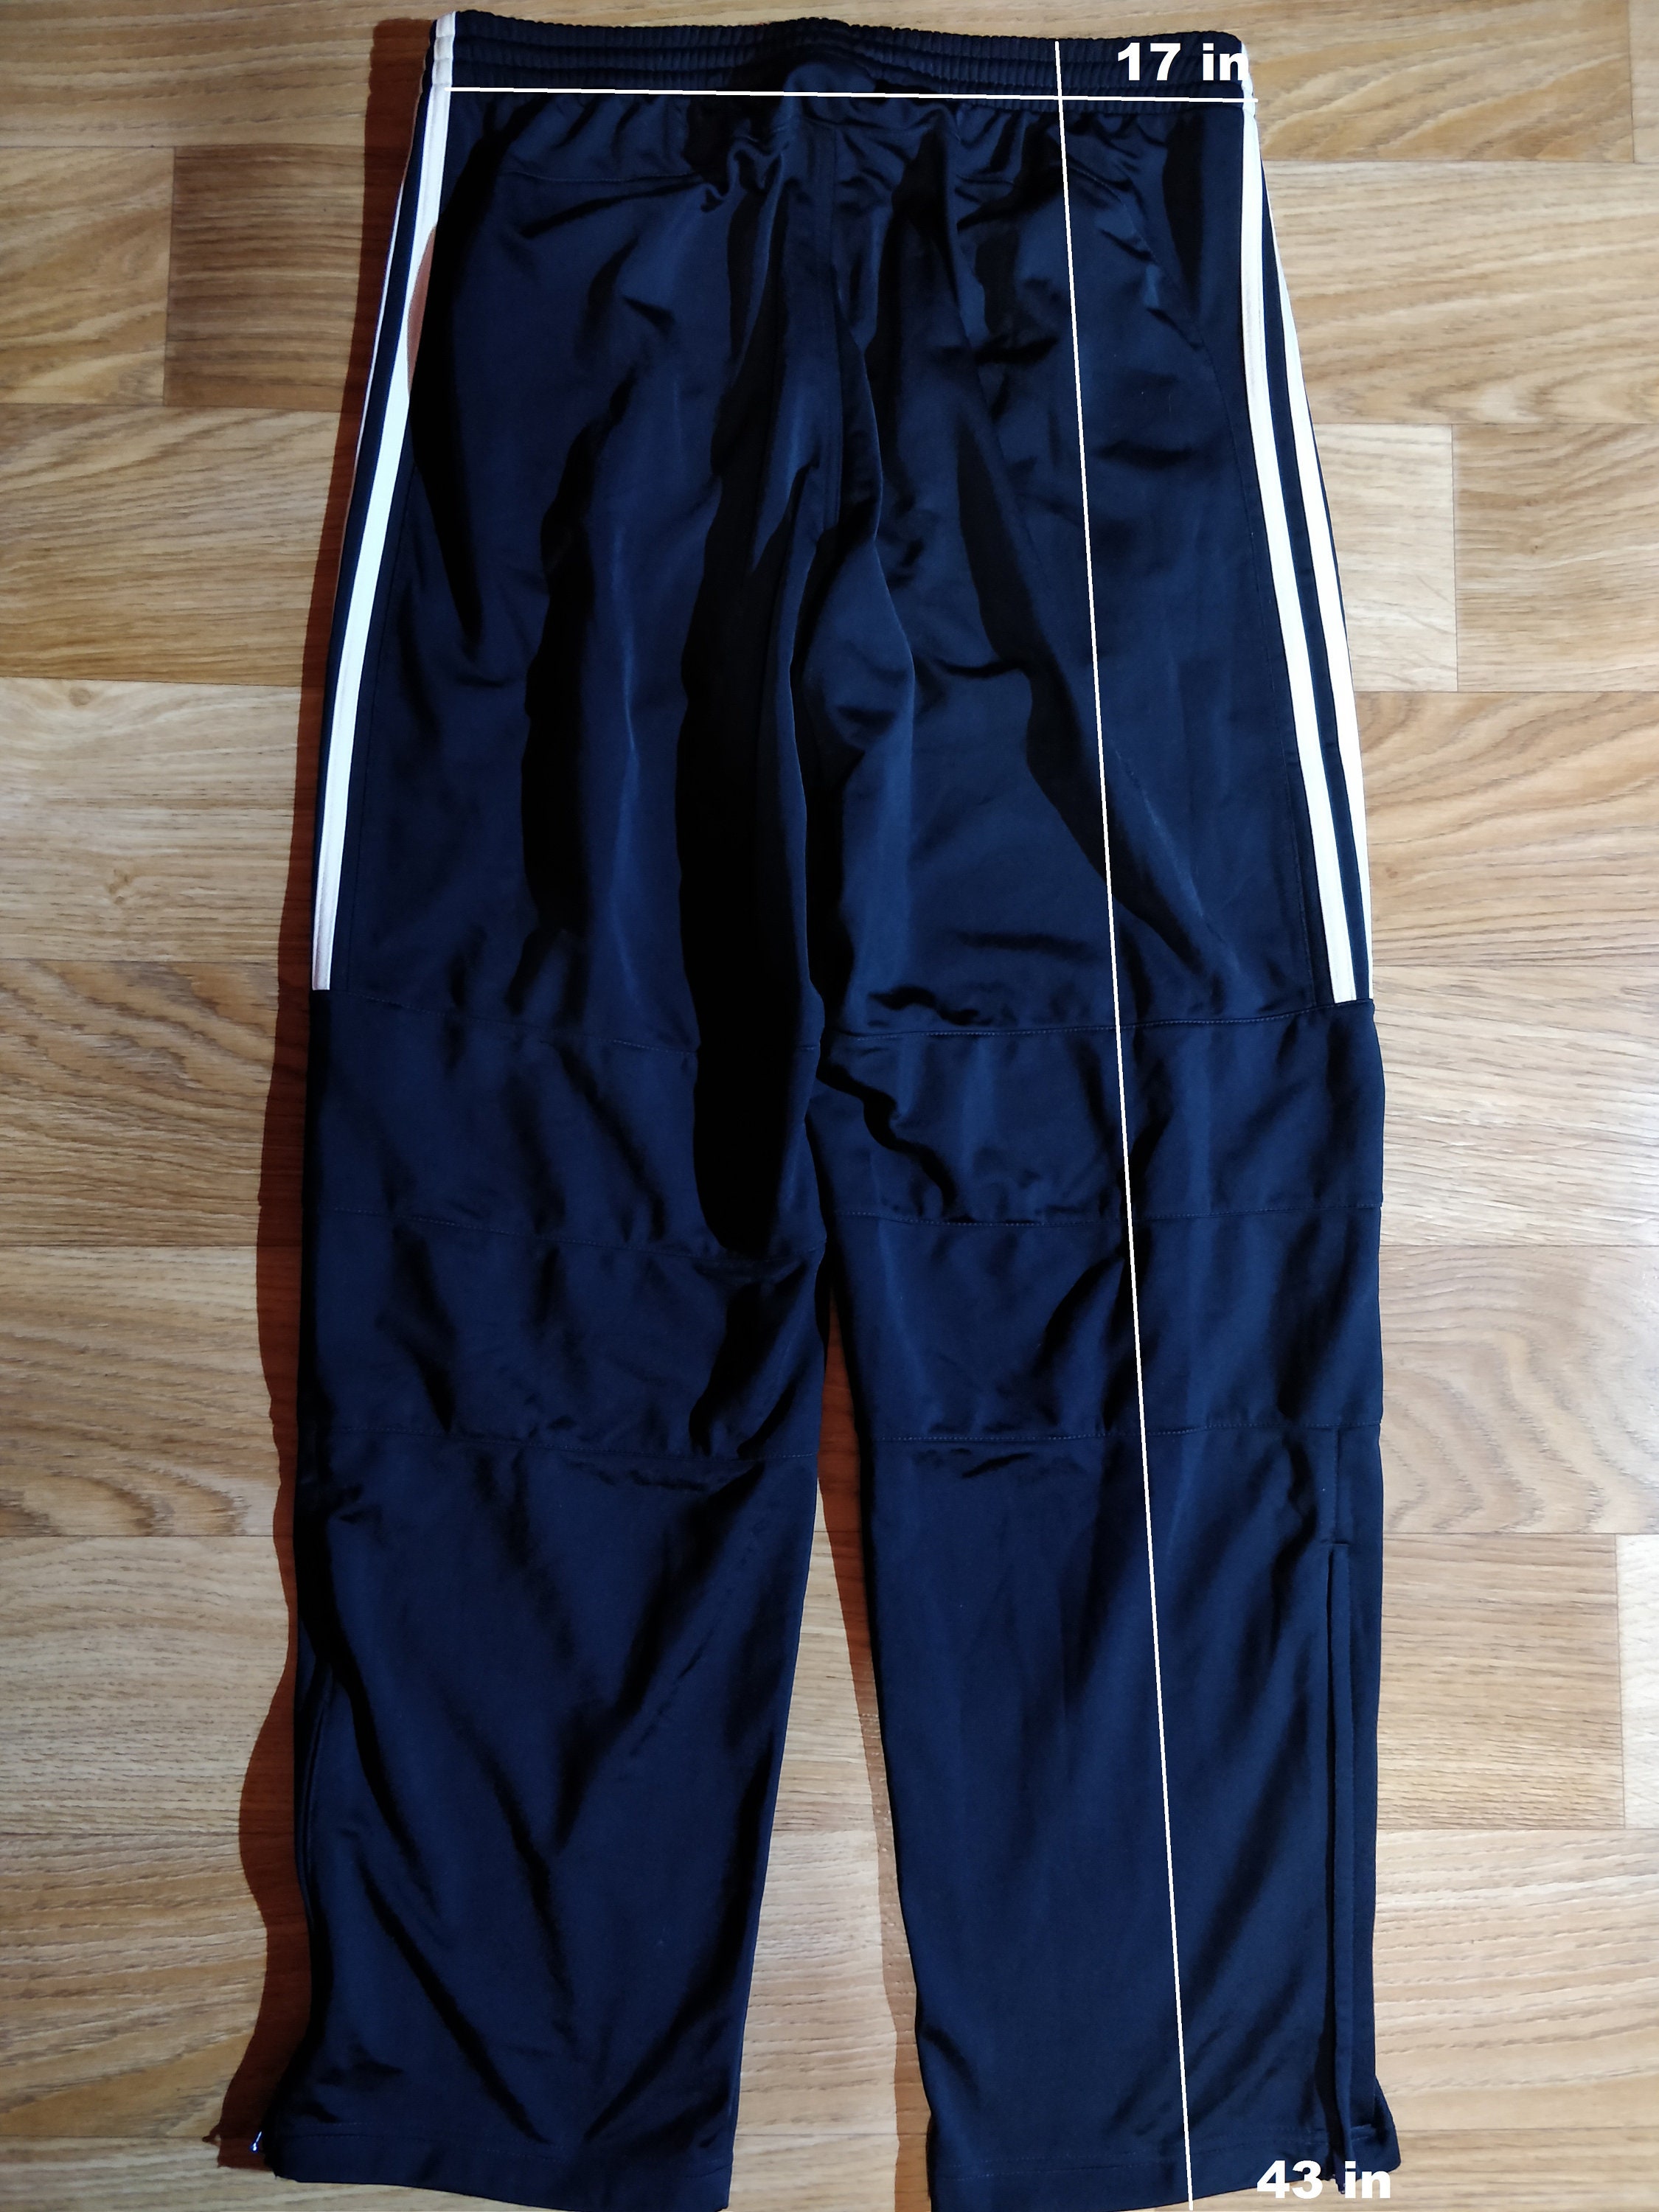 Adidas Mens Tracksuit Pants Trousers Training Navy Blue White | Etsy